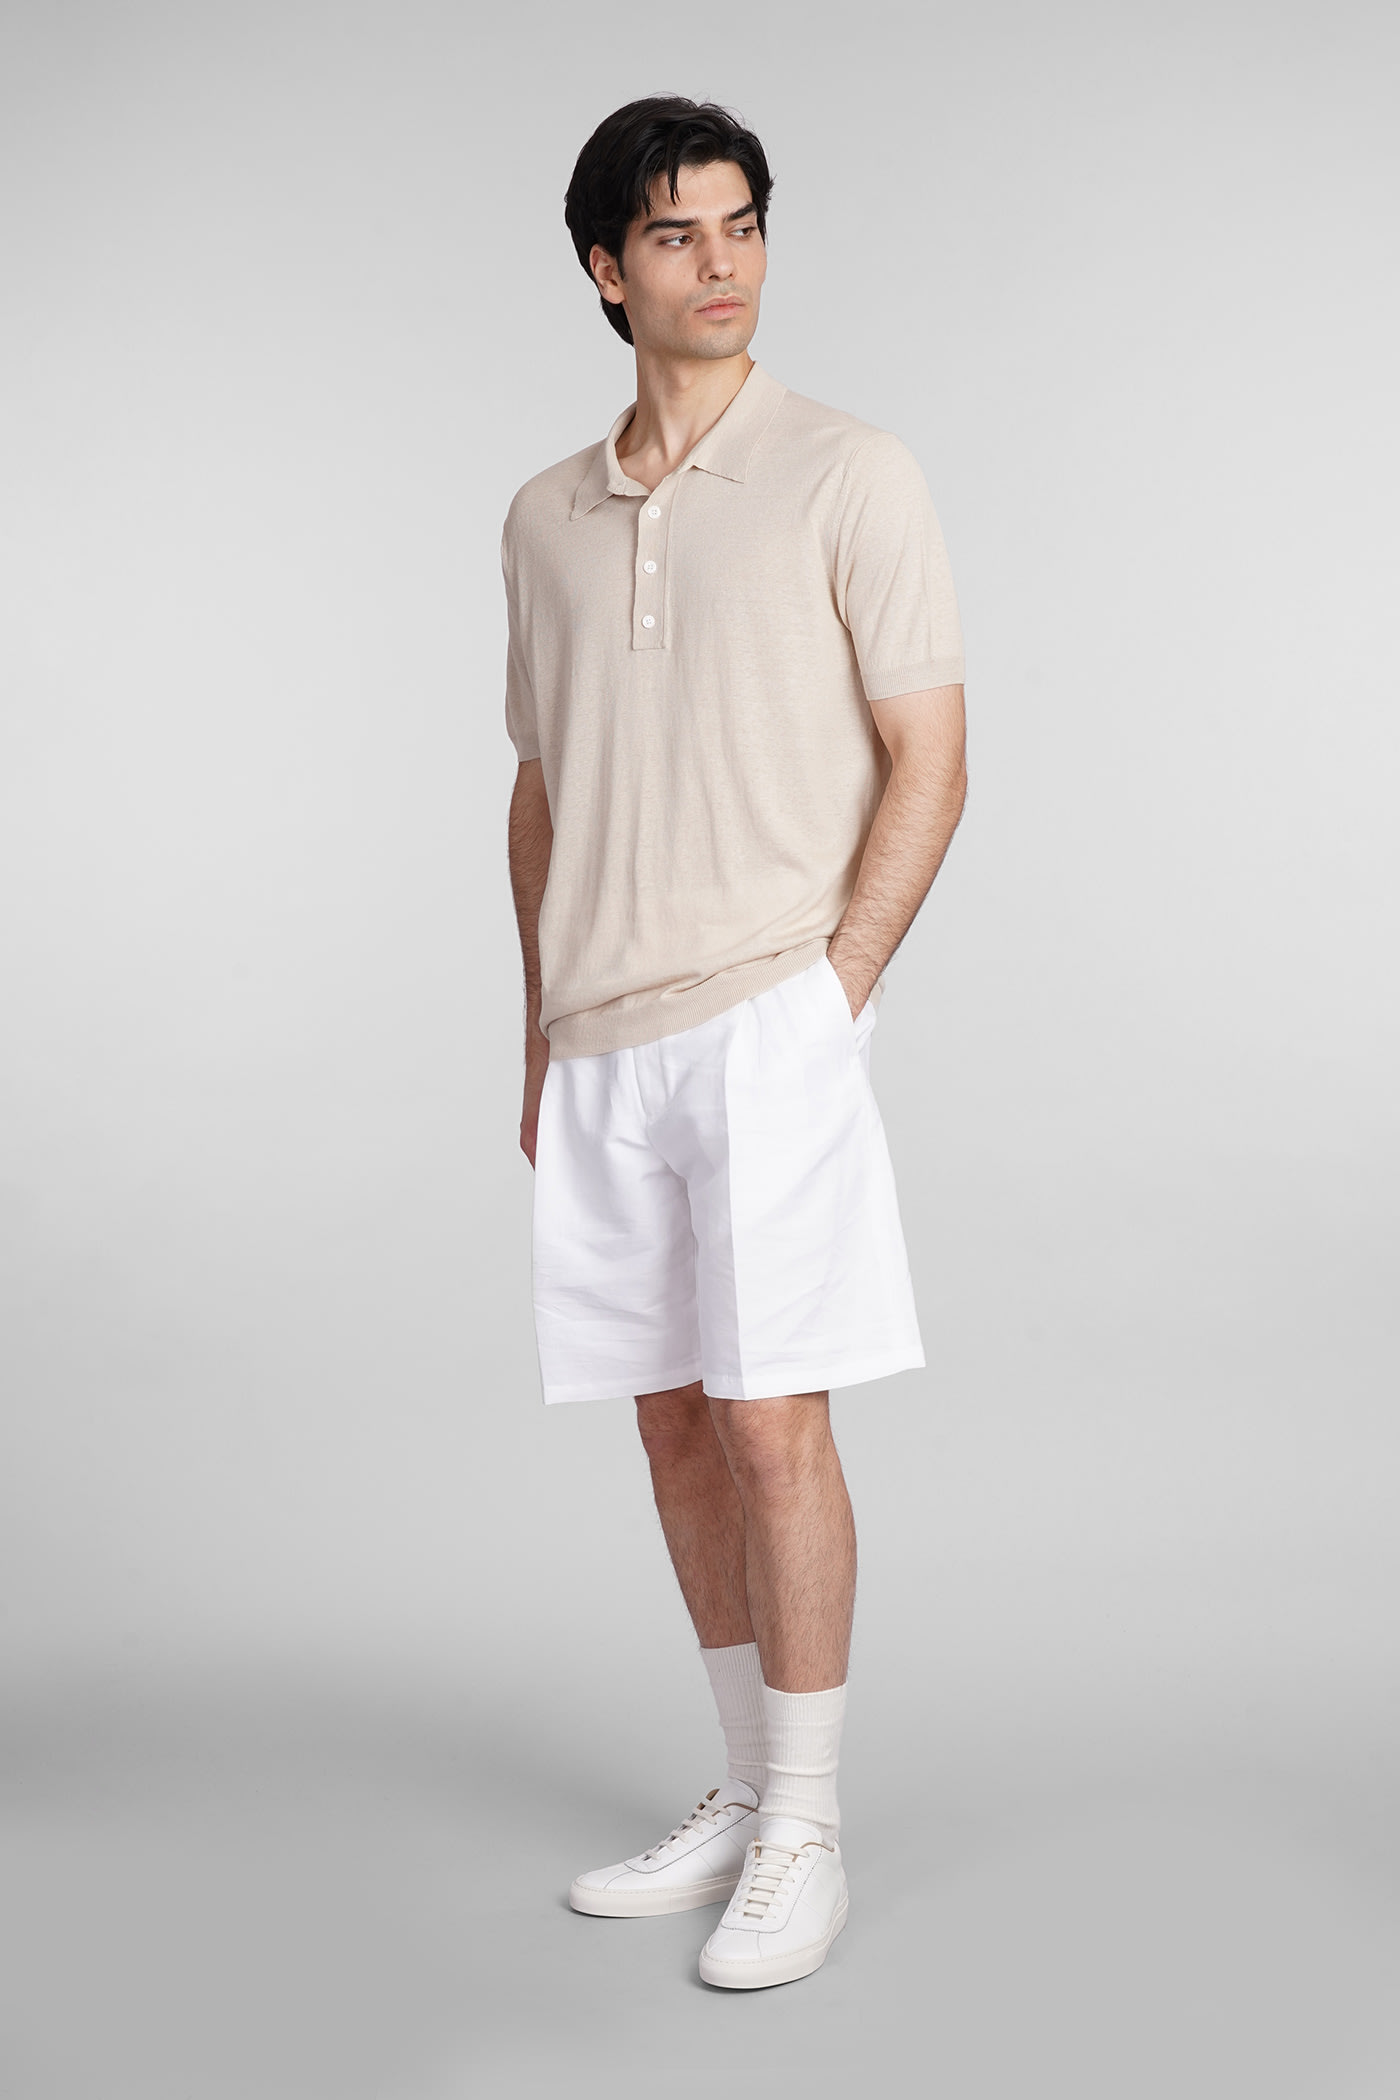 Shop Low Brand Tokyo Shorts In White Linen